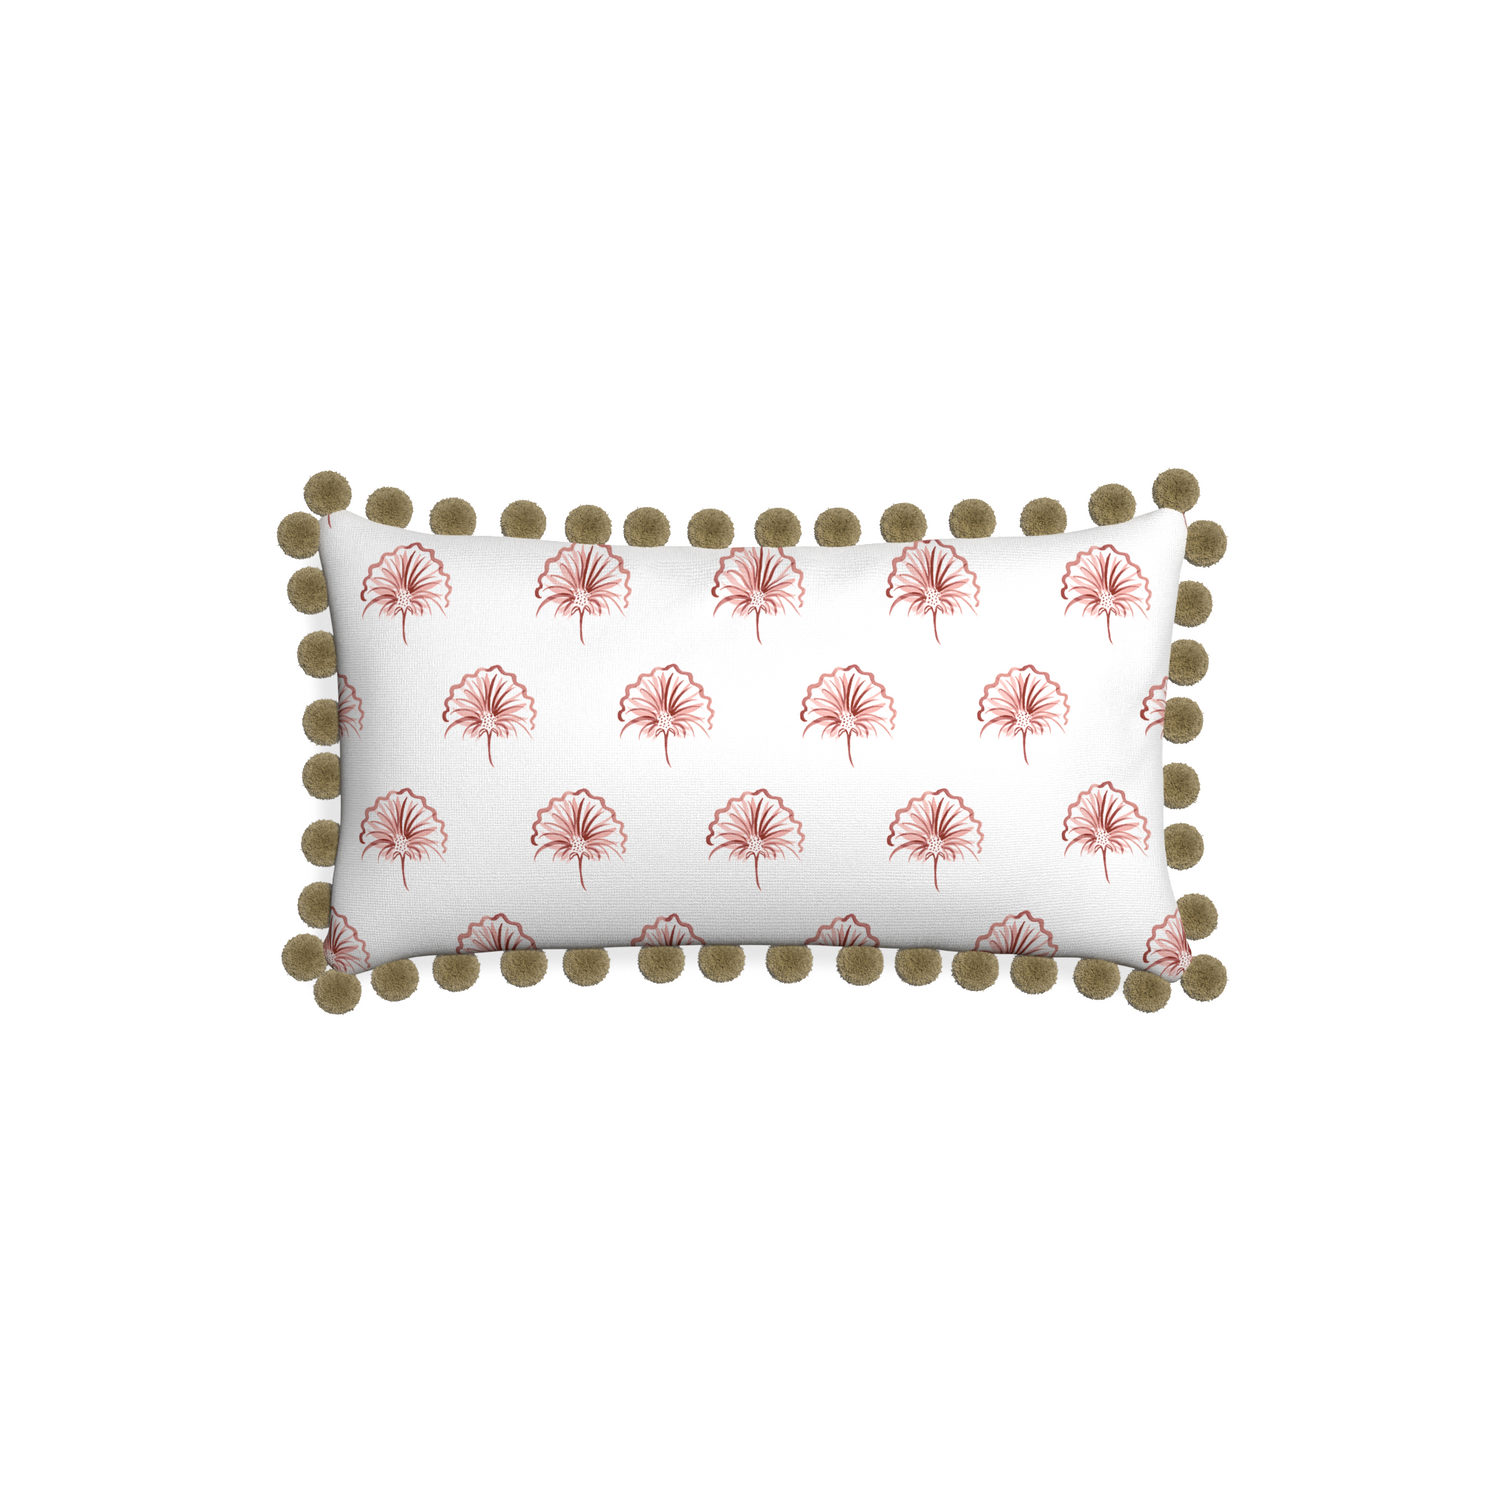 Petite-lumbar penelope rose custom floral pinkpillow with olive pom pom on white background